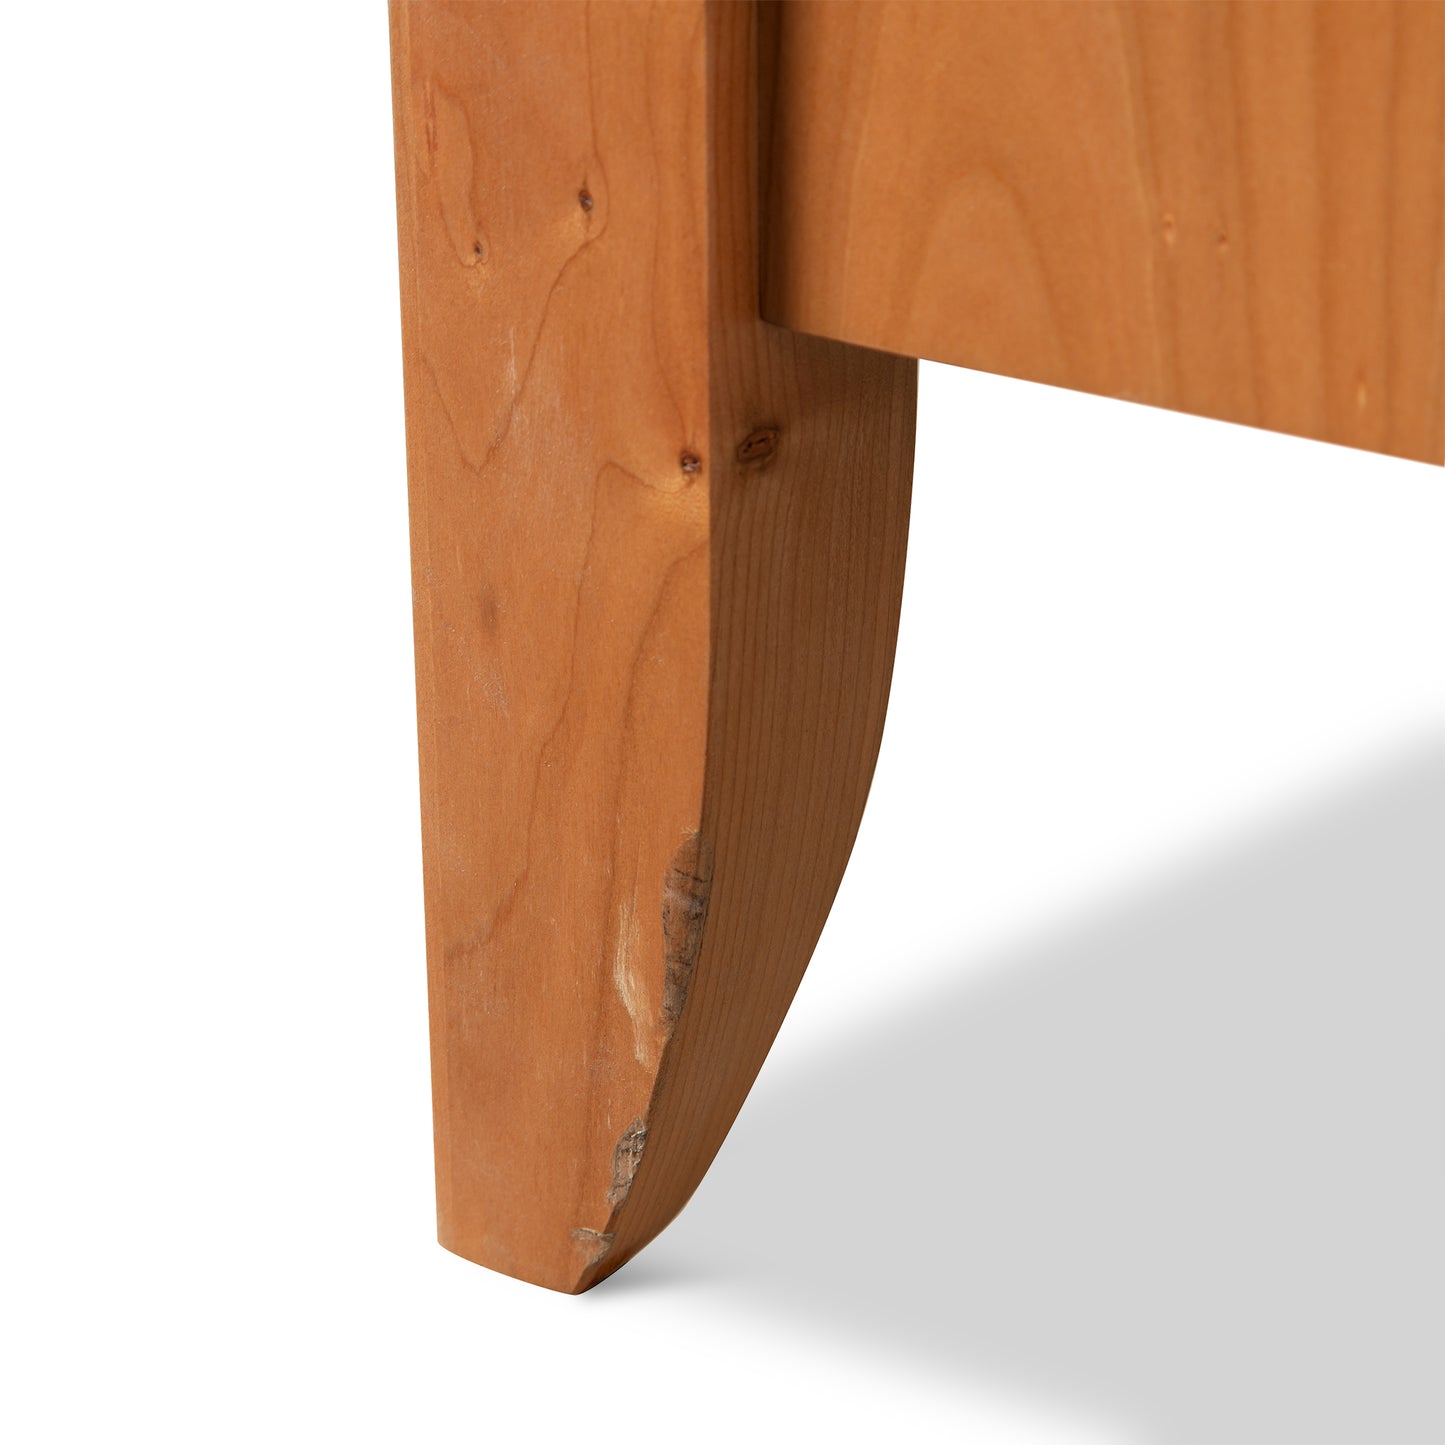 A close up of a Lyndon Furniture Bow Front 3-Drawer Nightstand - Clearance available for purchase.